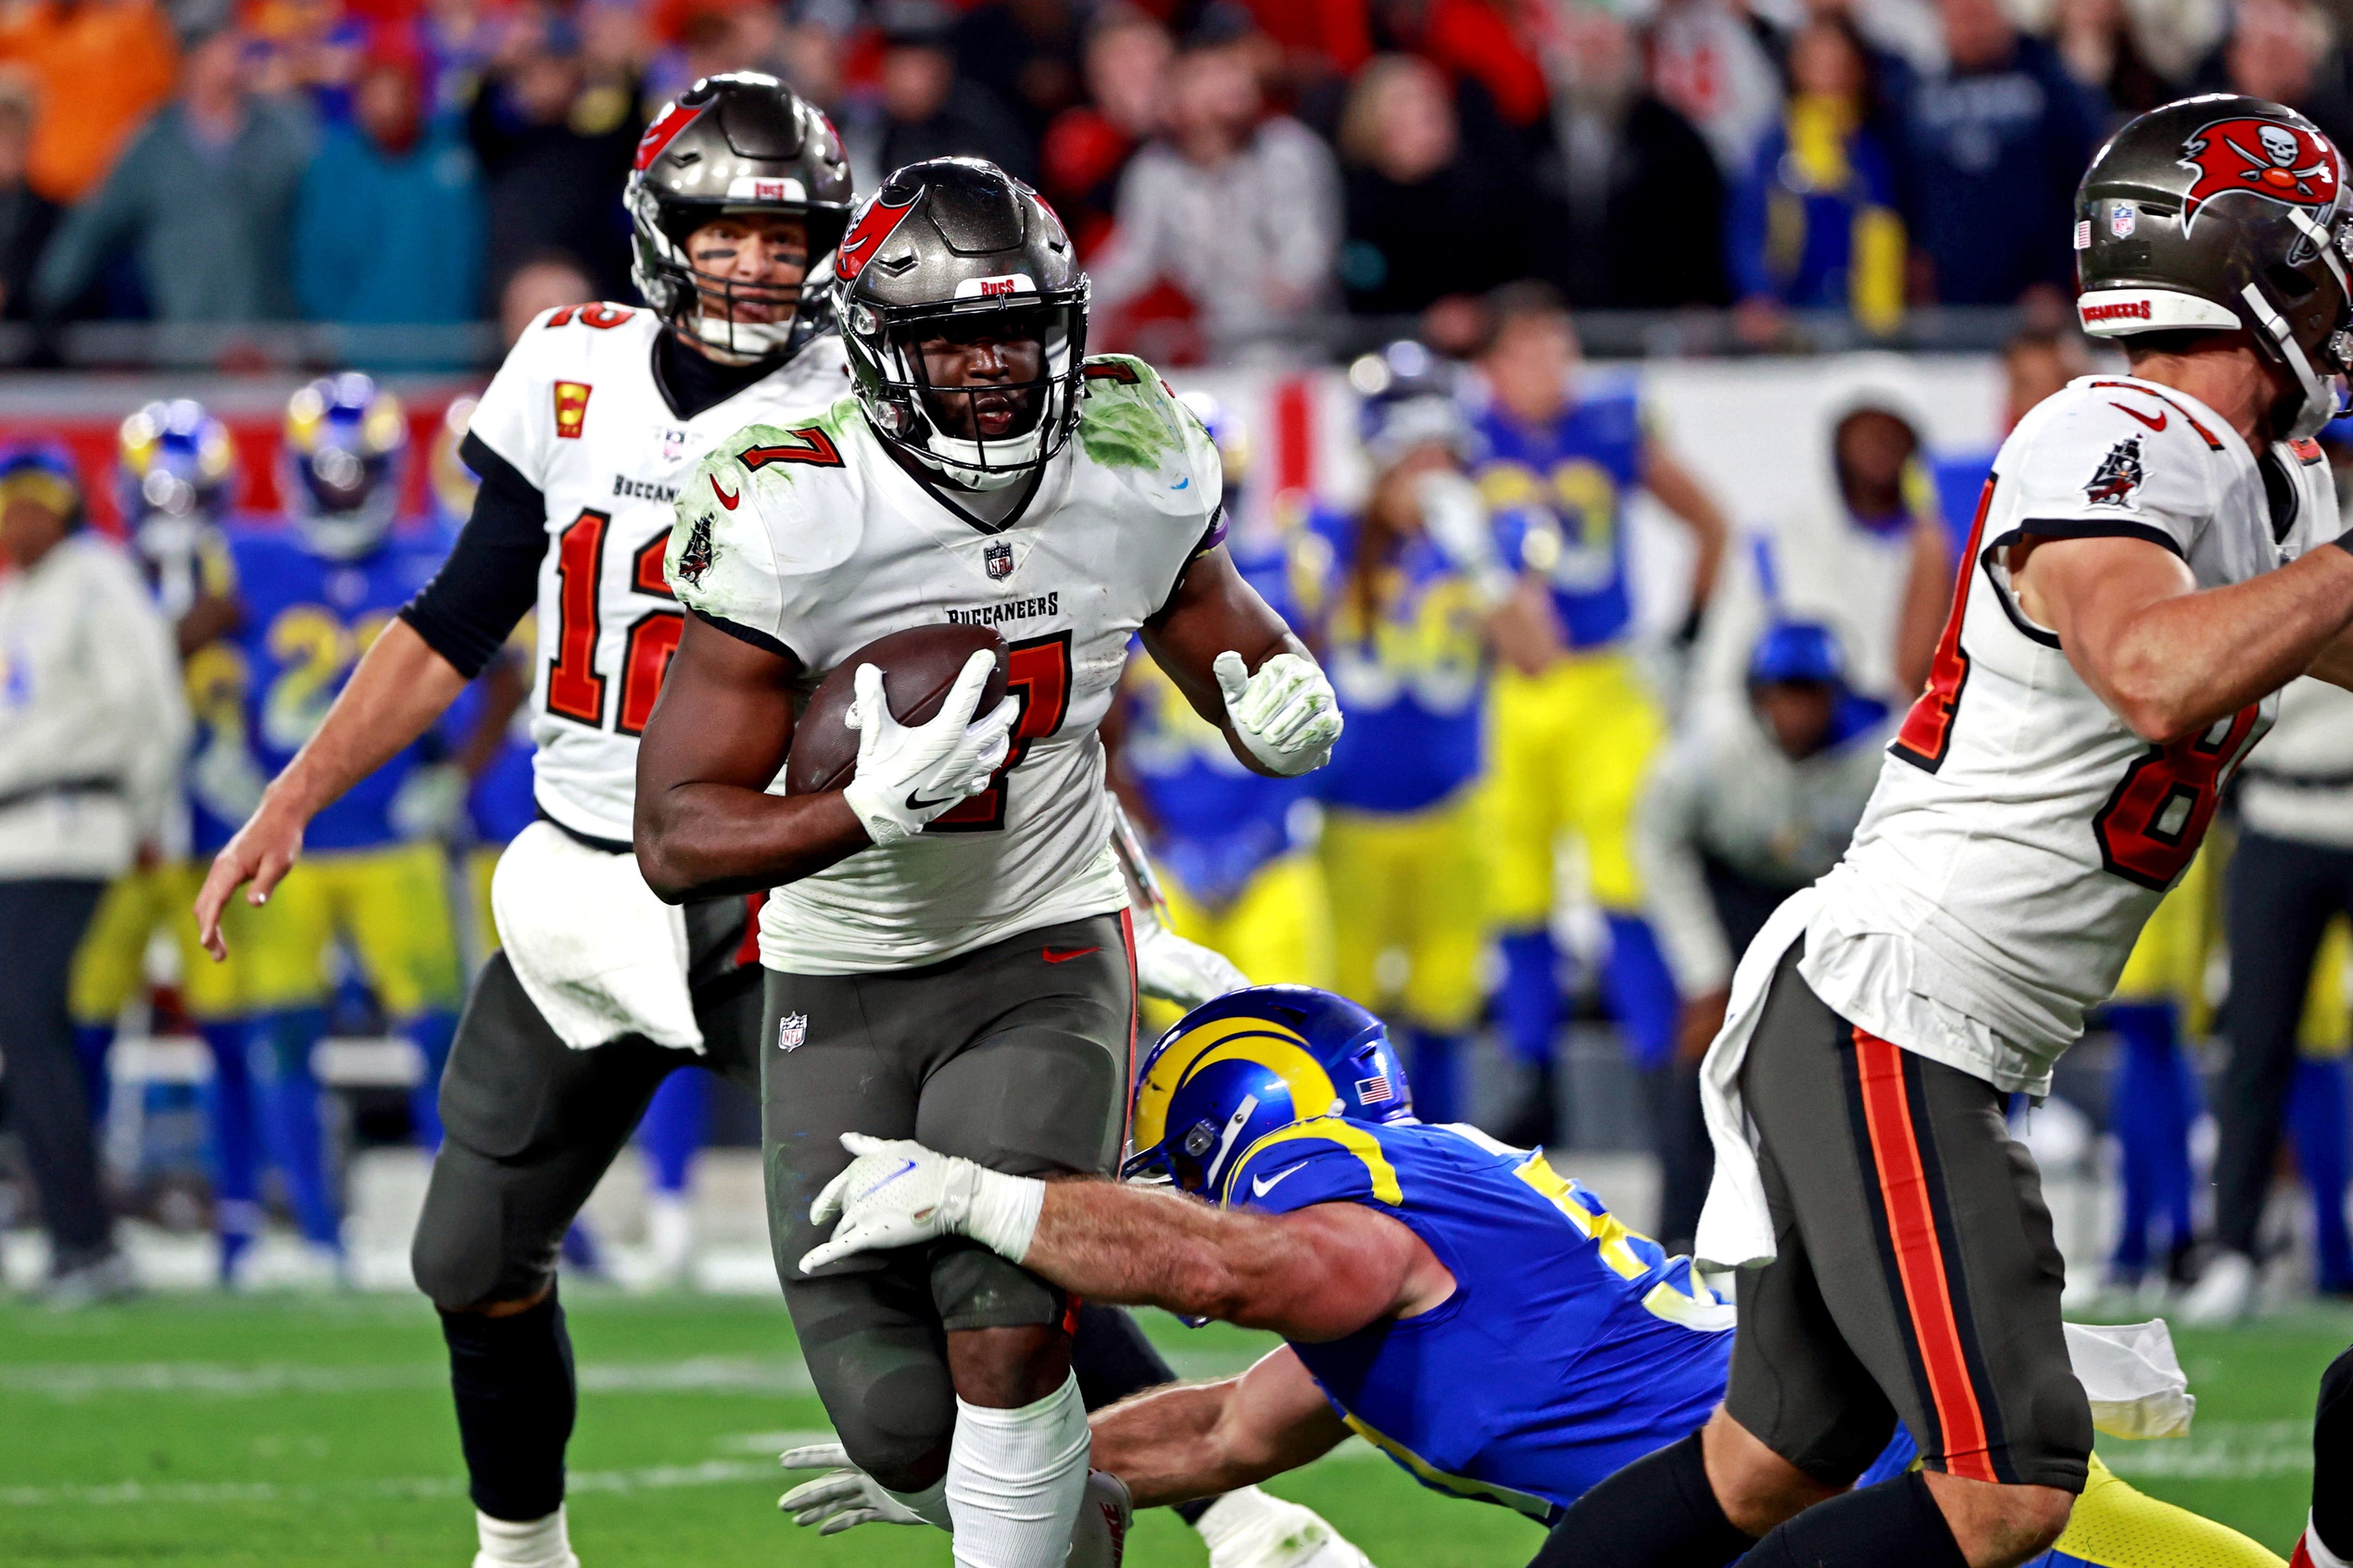 Leonard Fournette making most of 2nd chance with Buccaneers